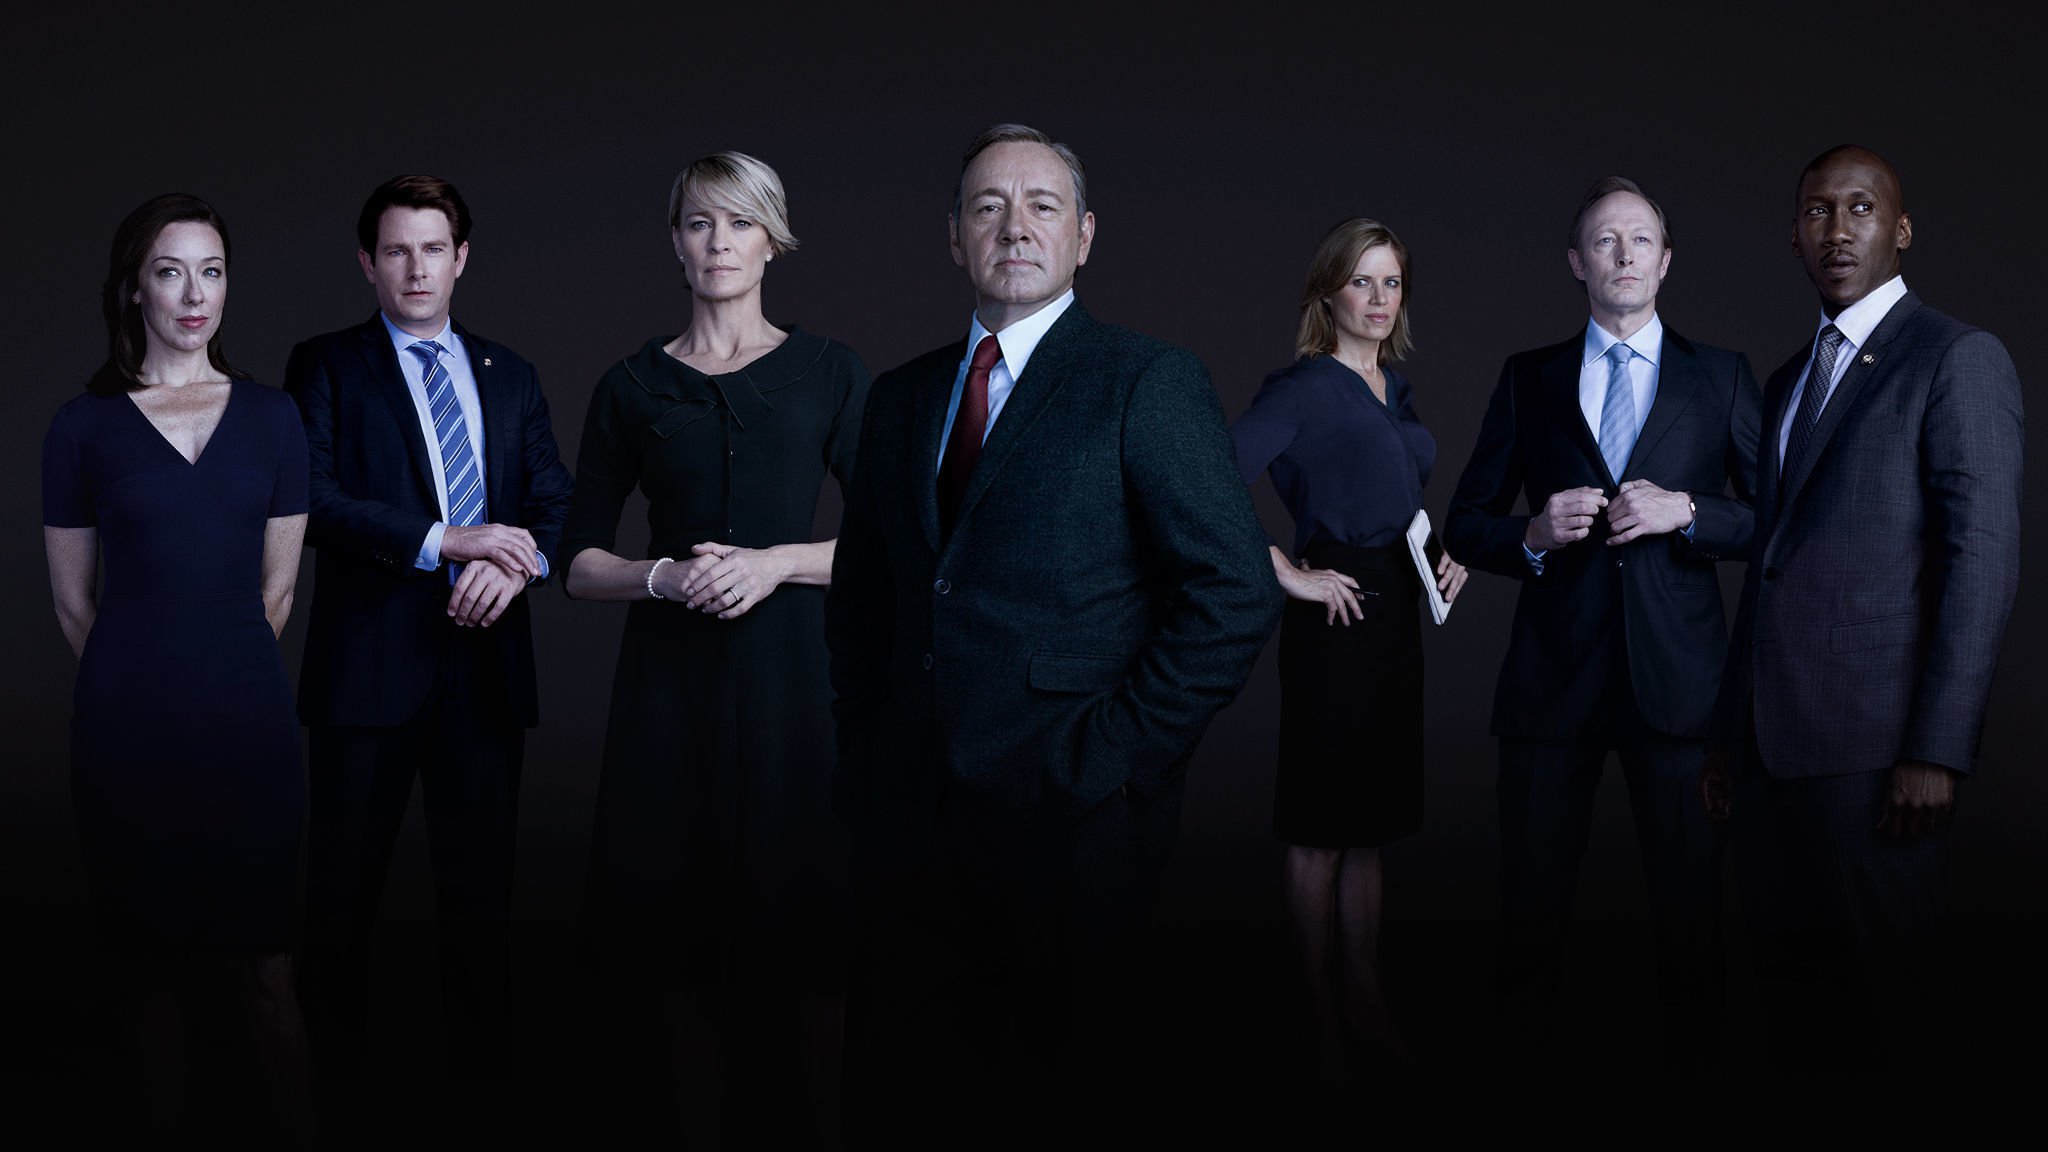 tv show, house of cards, kevin spacey, robin wright